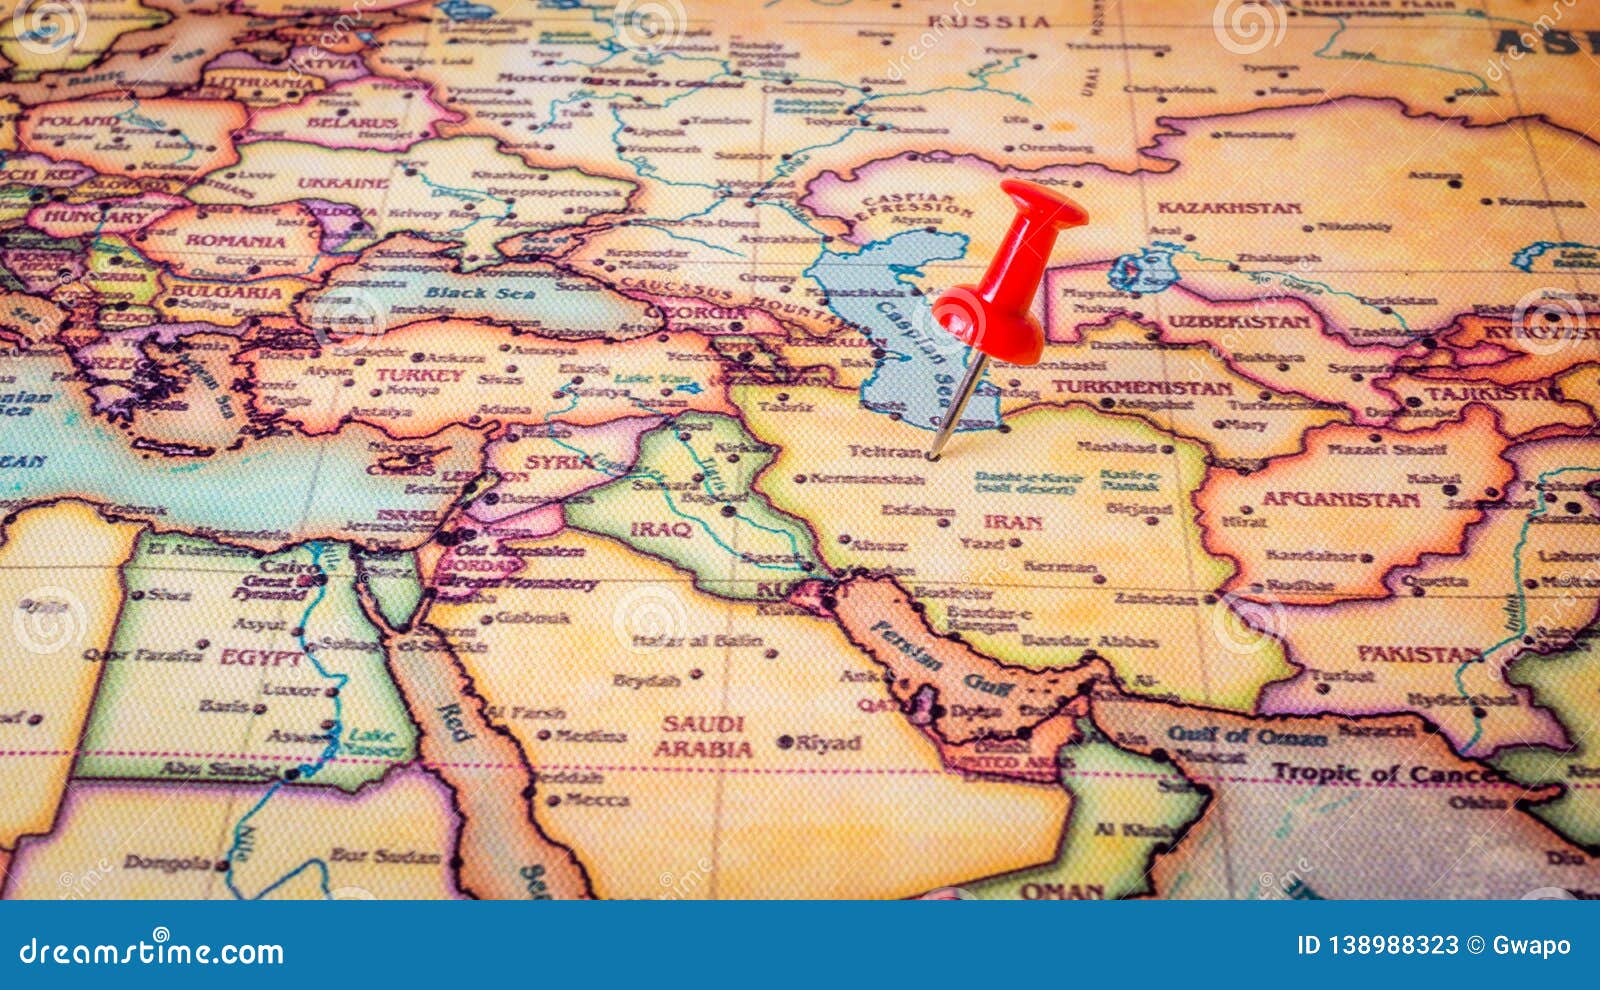 Red Pin On Map Of Iran Capital City Tehran Stock Image